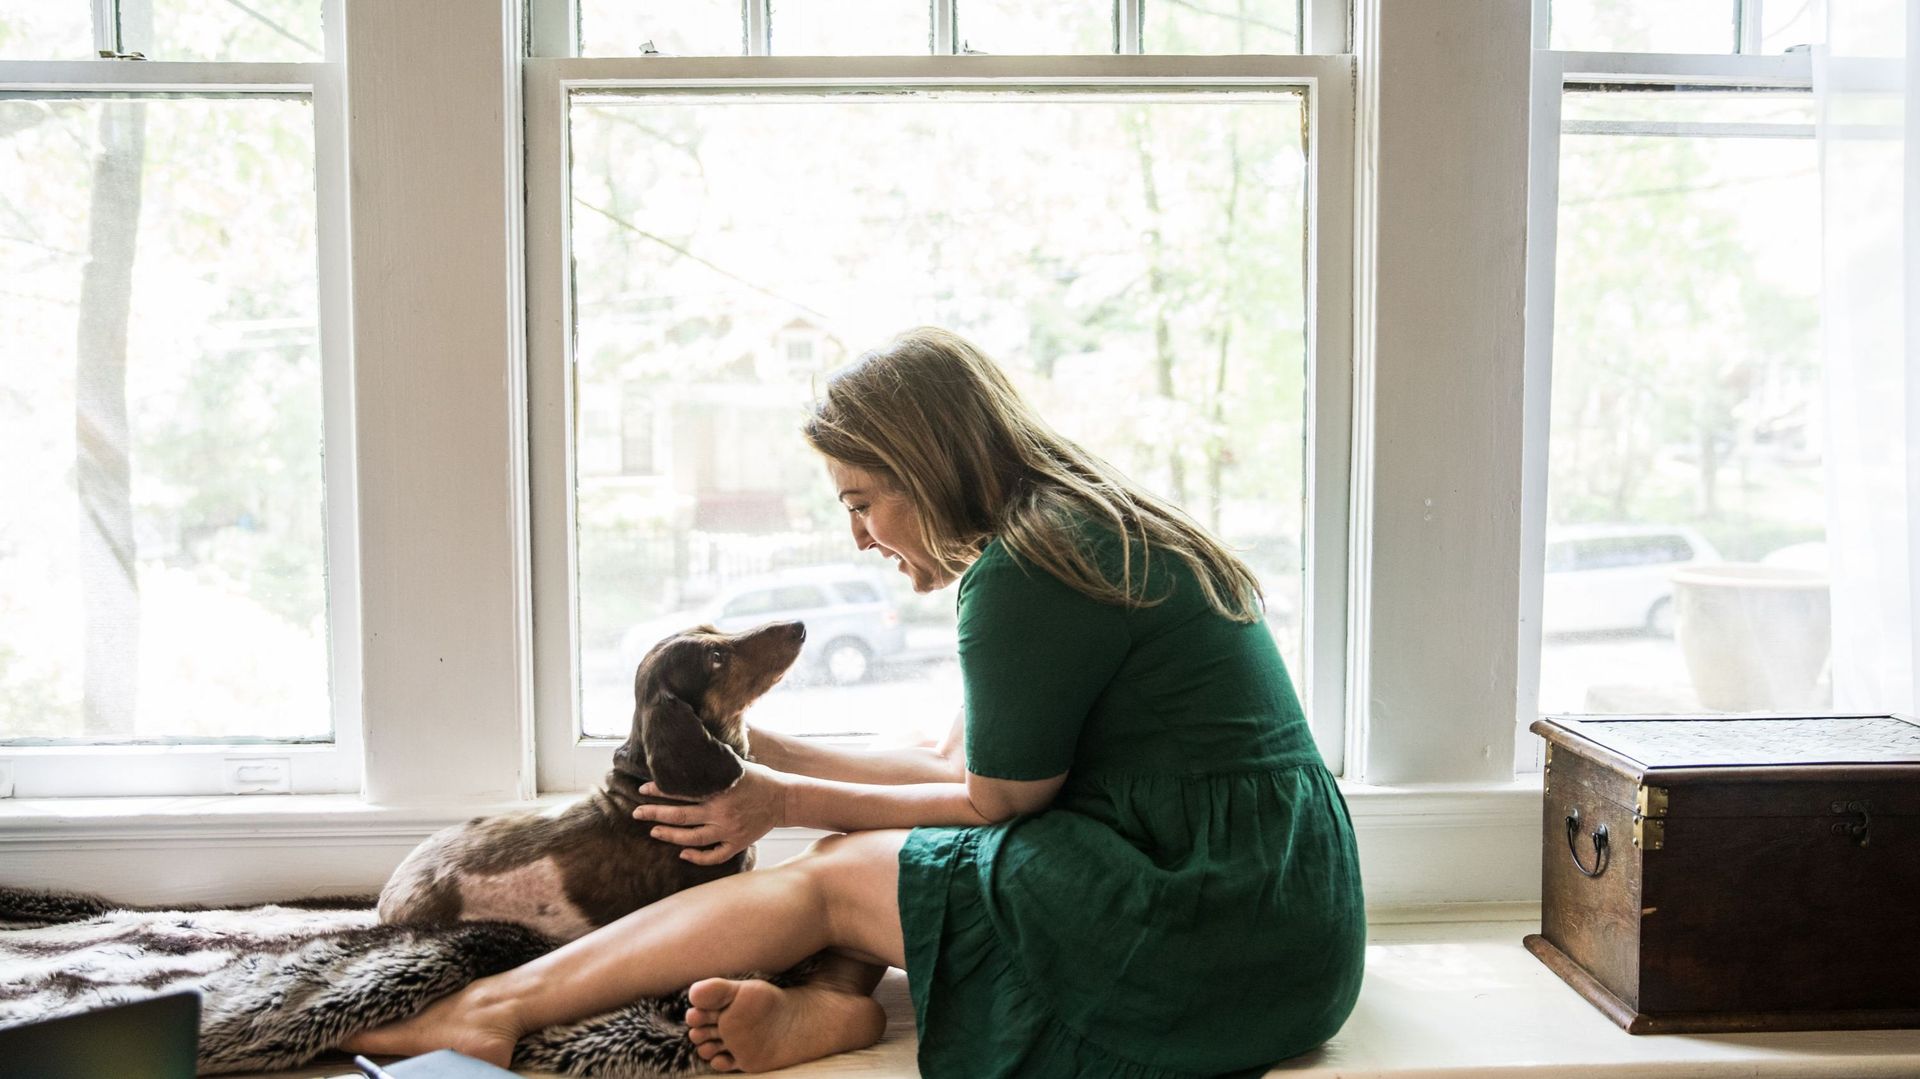 Woman sitting in window with dog